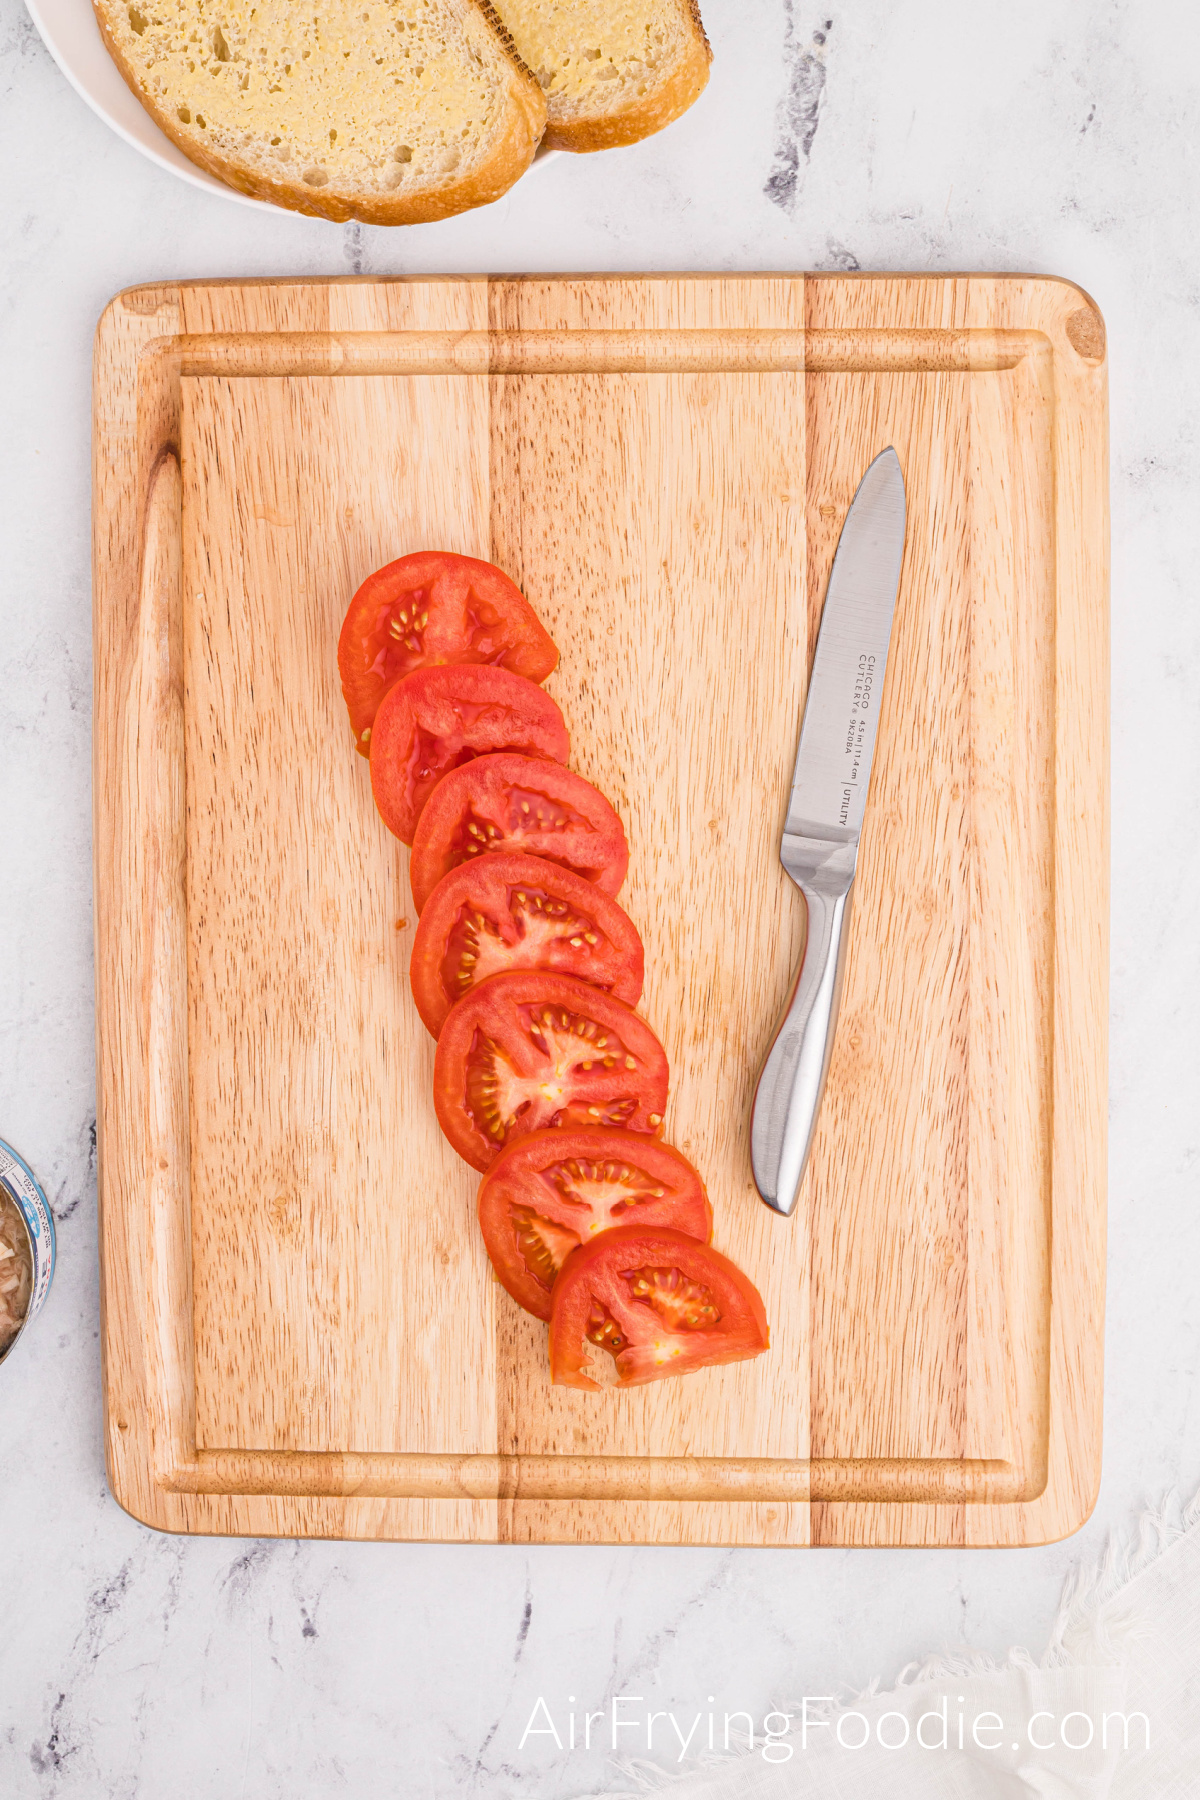 A tomato is sliced and lined on a cutting board with a butter knife on the right of the cutting board and two slices of Texas toast on a round white plate above the cutting board.